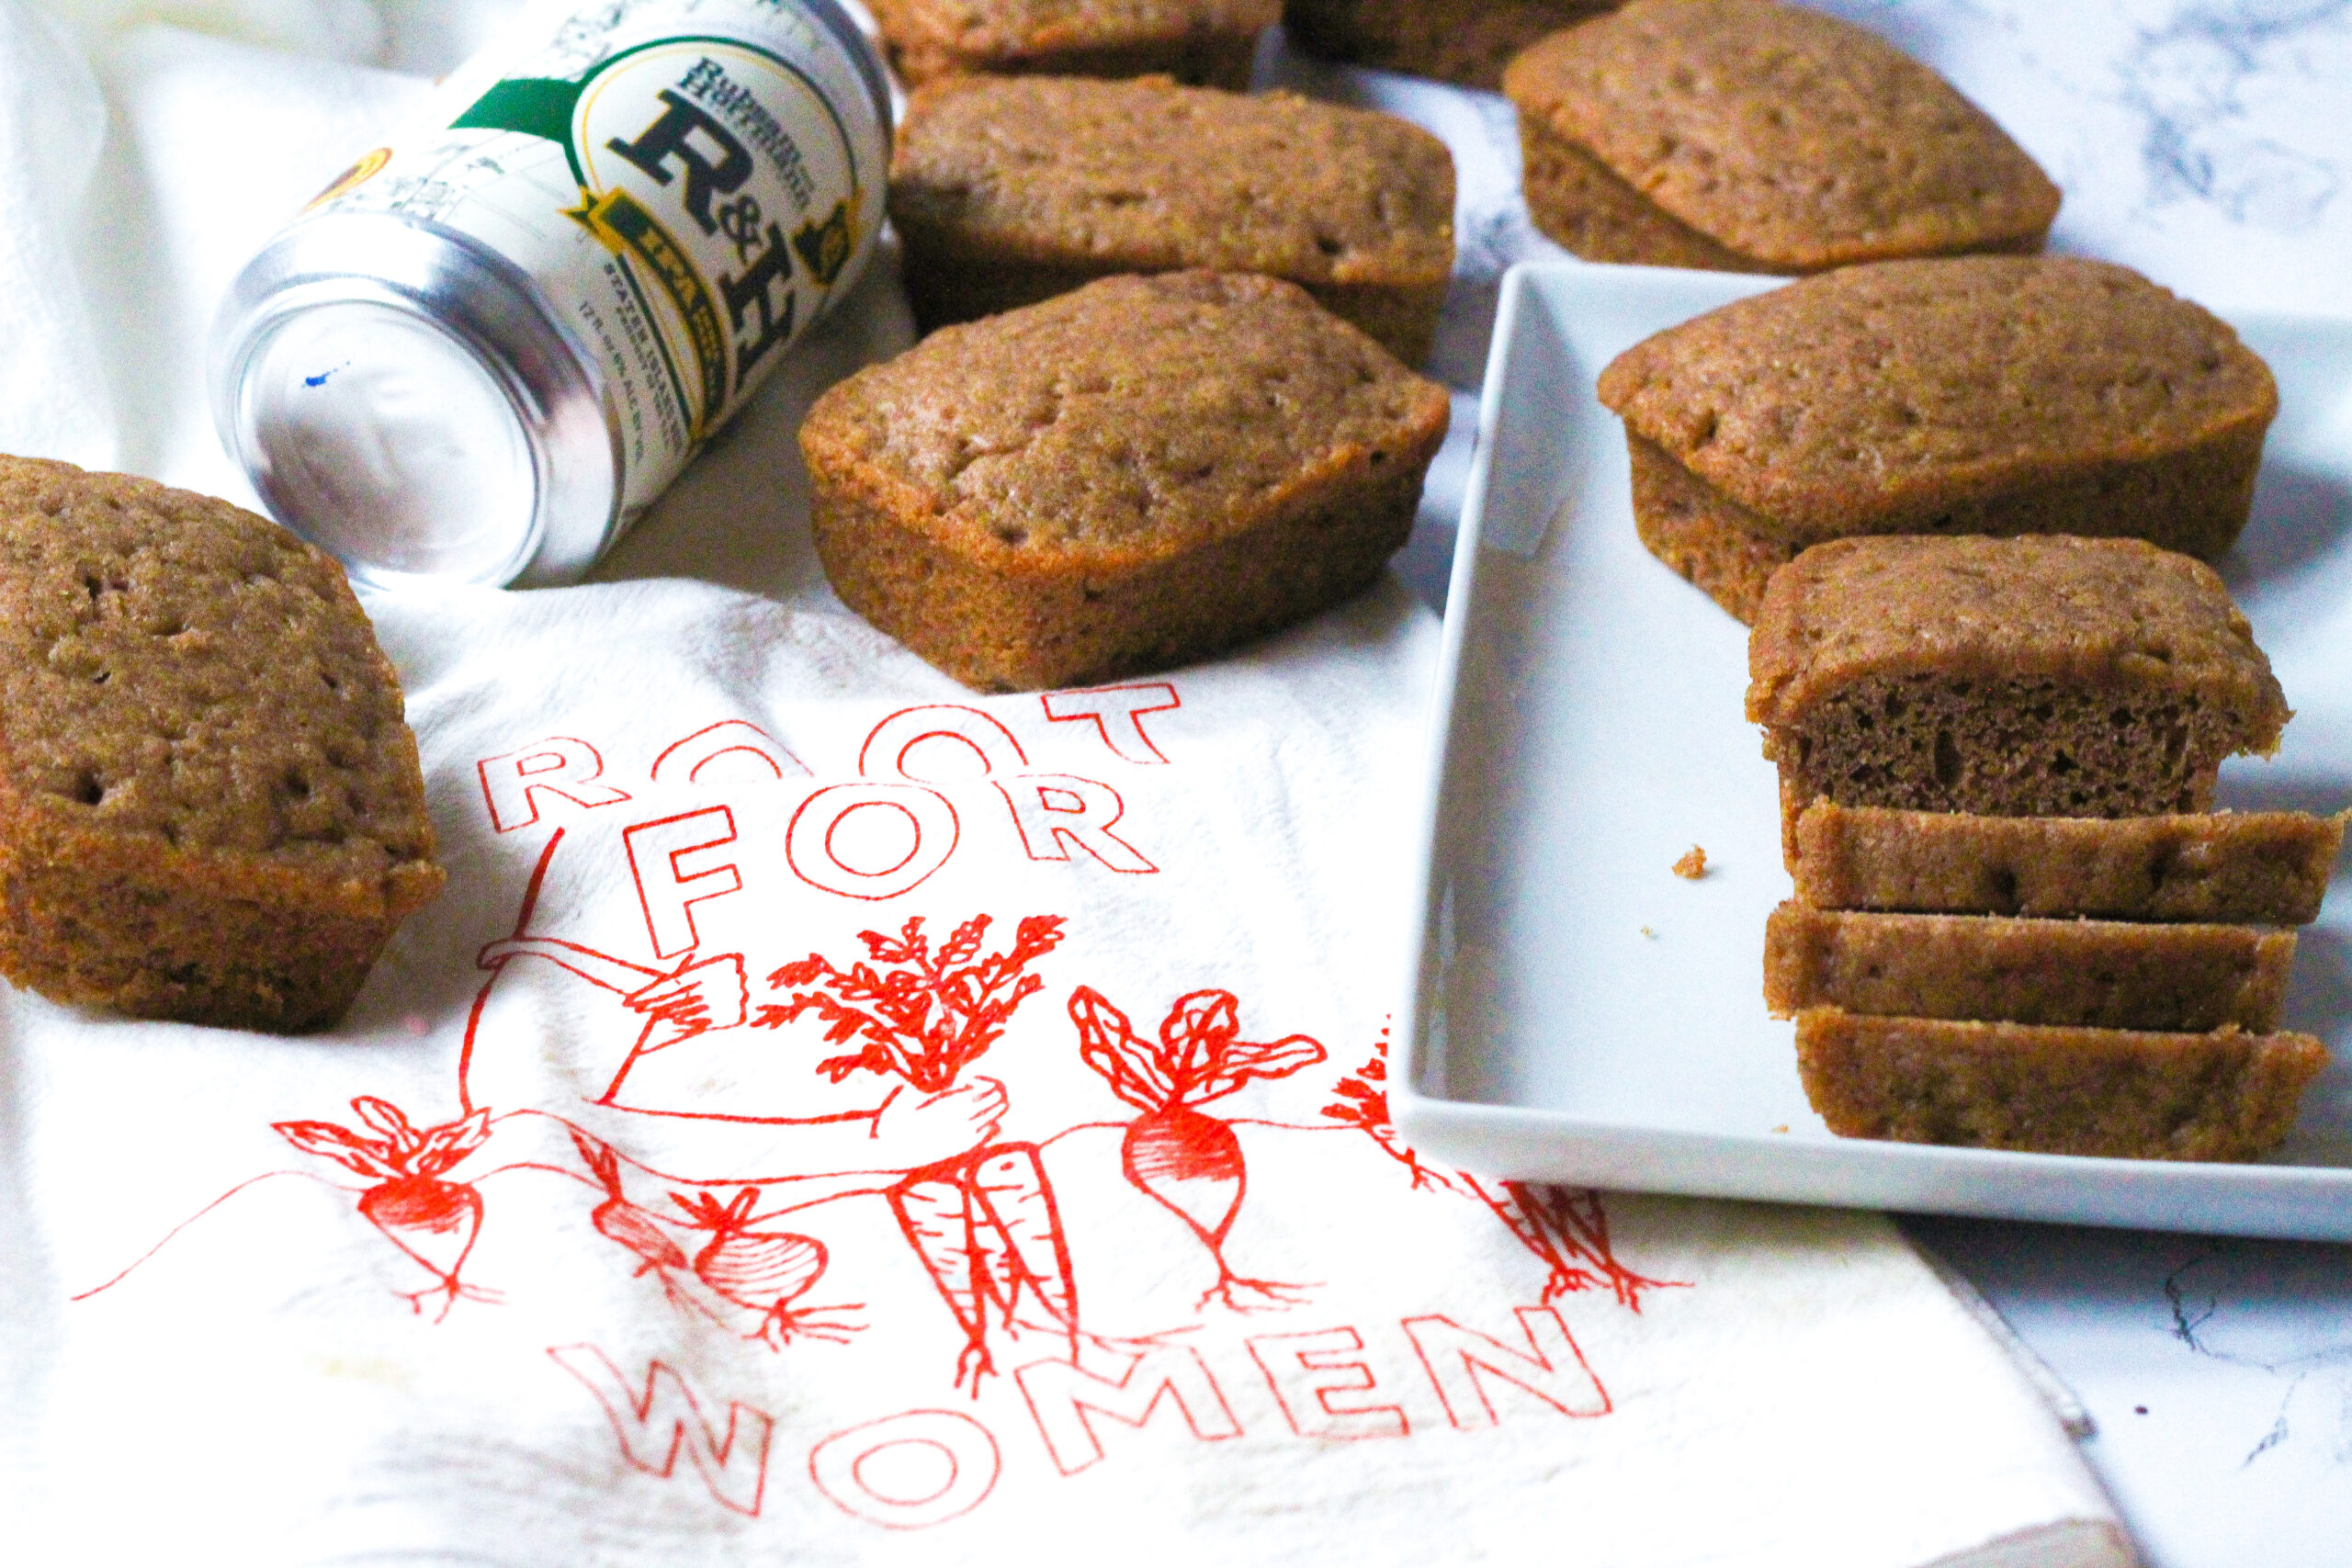 On the left side of the photo is a white dish towel that says Root for Women in red with root vegetables on it. In the upper left of the image on top of the towel above the words are some mini loaves of spiced beer bread and a can of R&H IPA Beer. On the right side of the photo is a white rectangular plate that slightly overlaps the towel. On the plate in the back is a mini loaf, and in the front is a loaf, the front half of which is sliced into three slices.